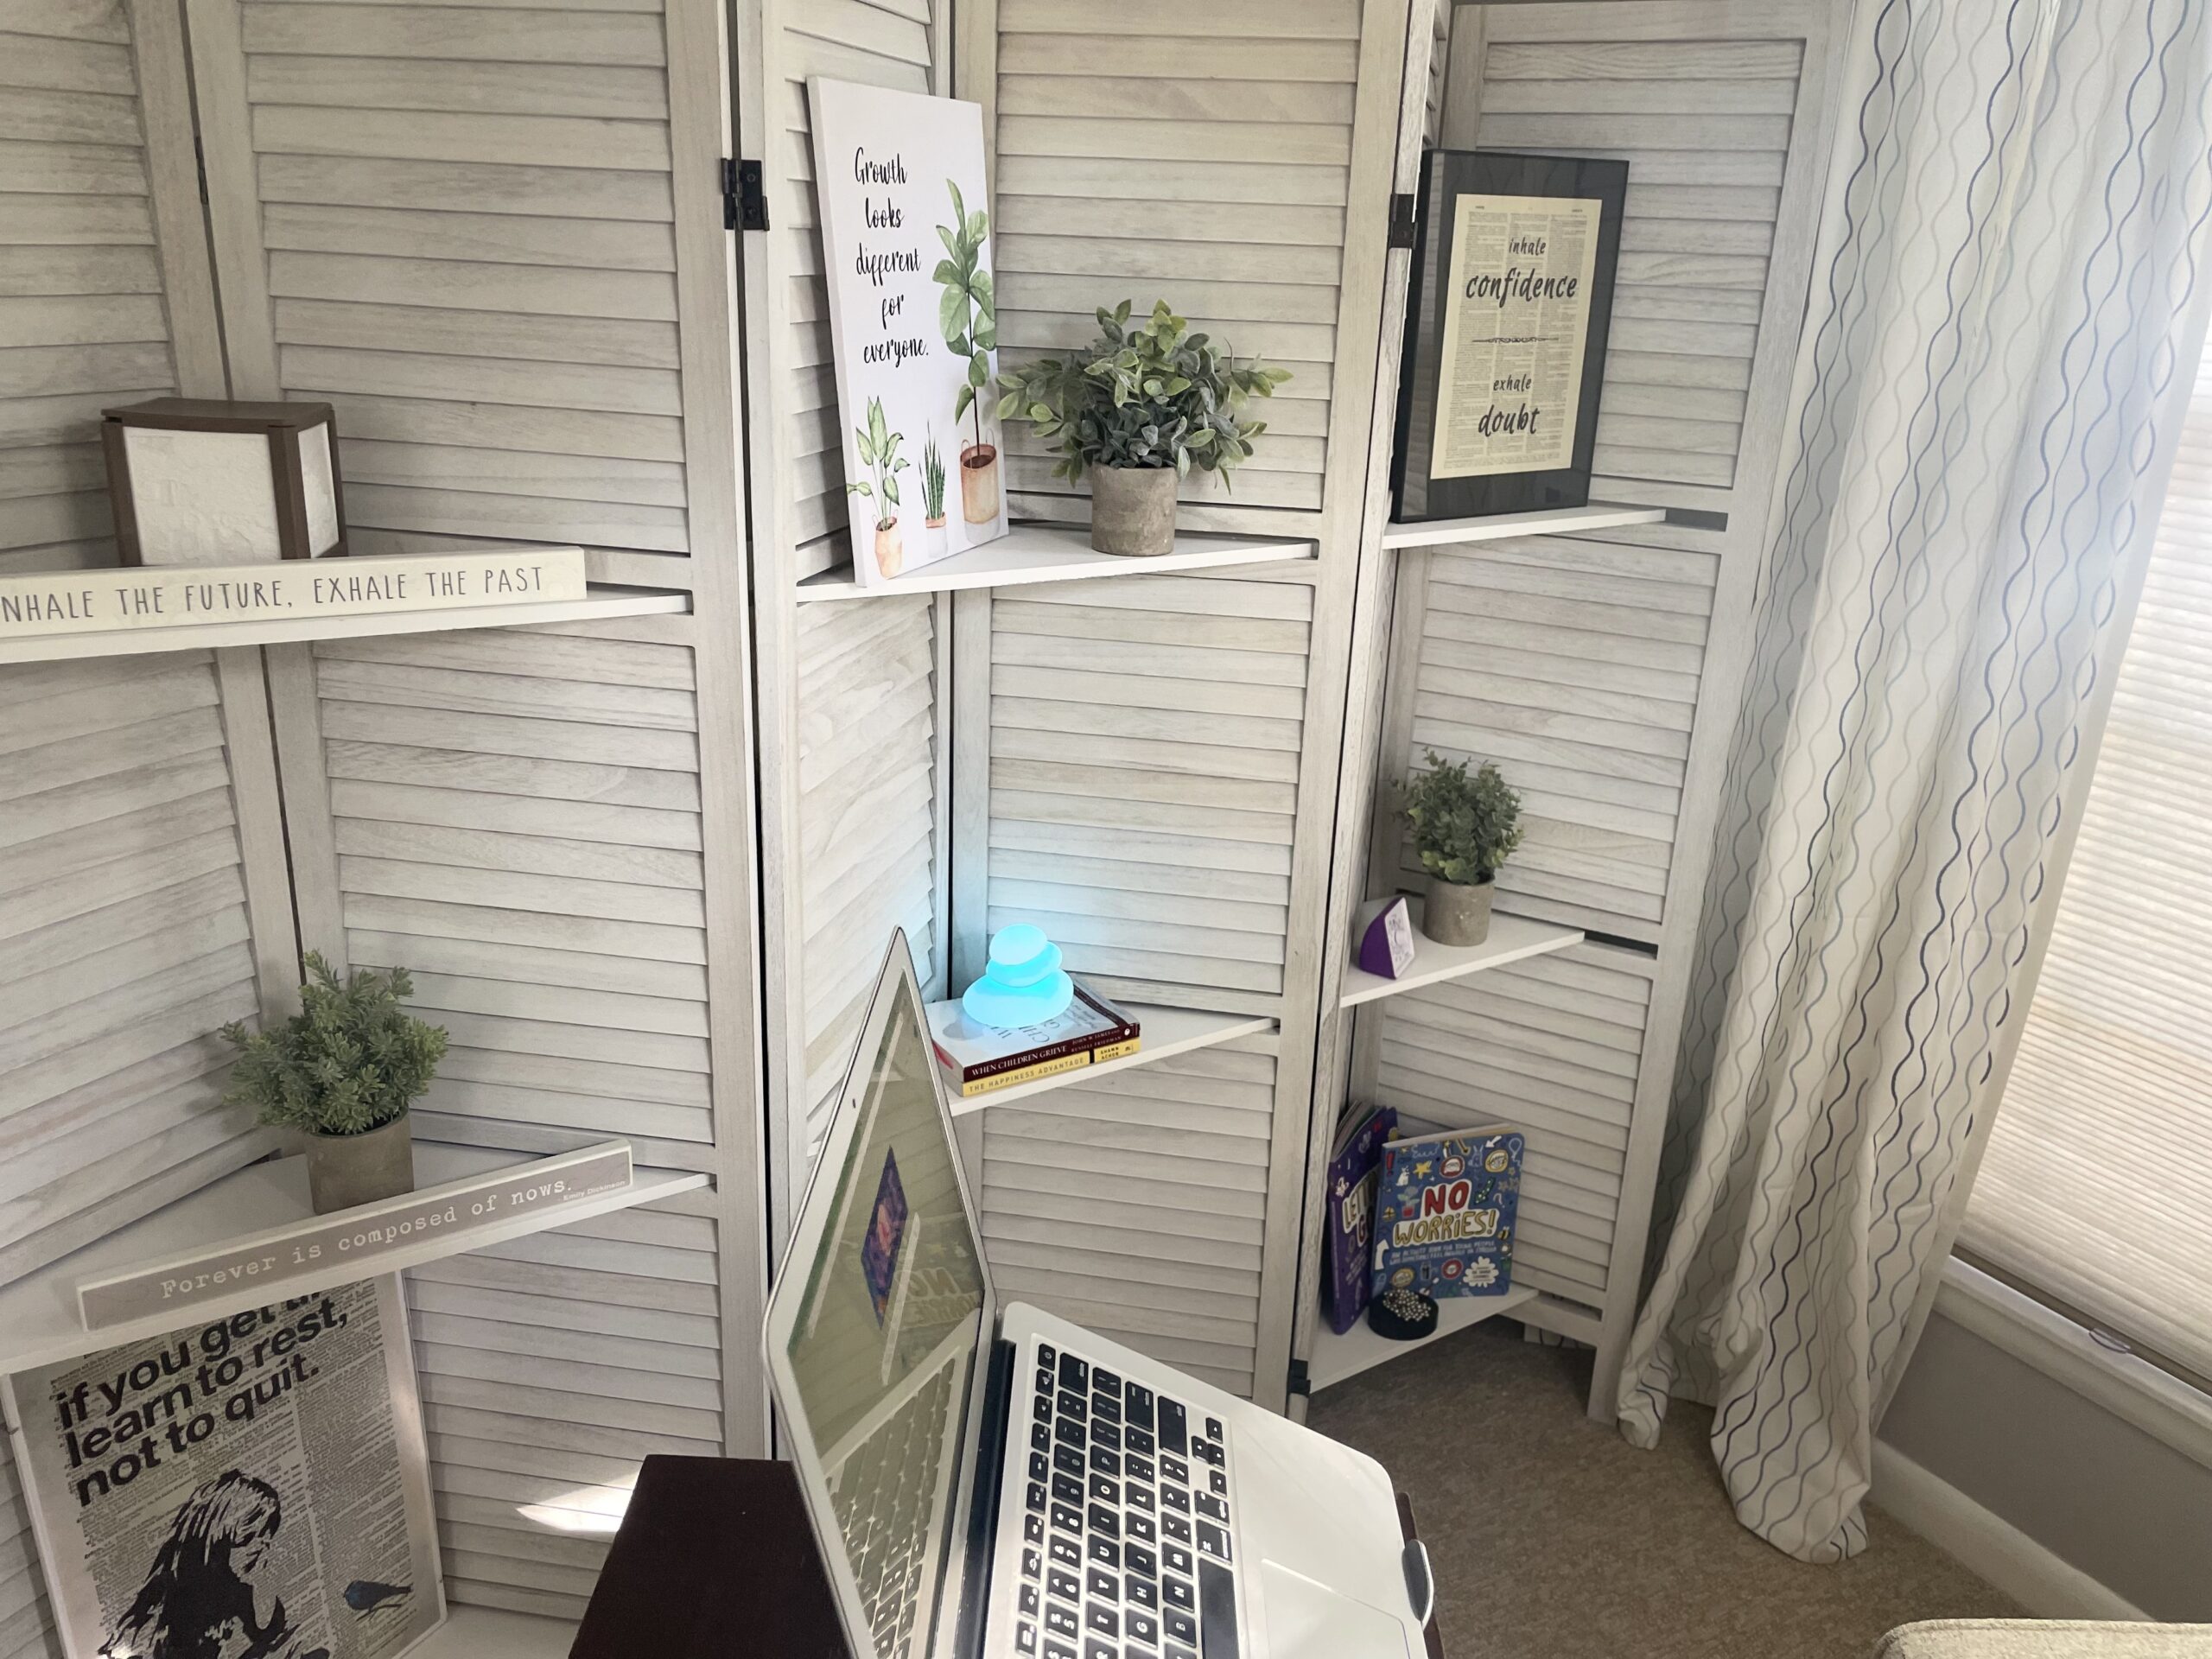 Office-setup-2-Kansas-teletherapy-space-Guided-Growth-Counseling-Center-Tracie-Schardein-virtual-telehealth-online-teletherapy-practice-located-in-Abilene-KS